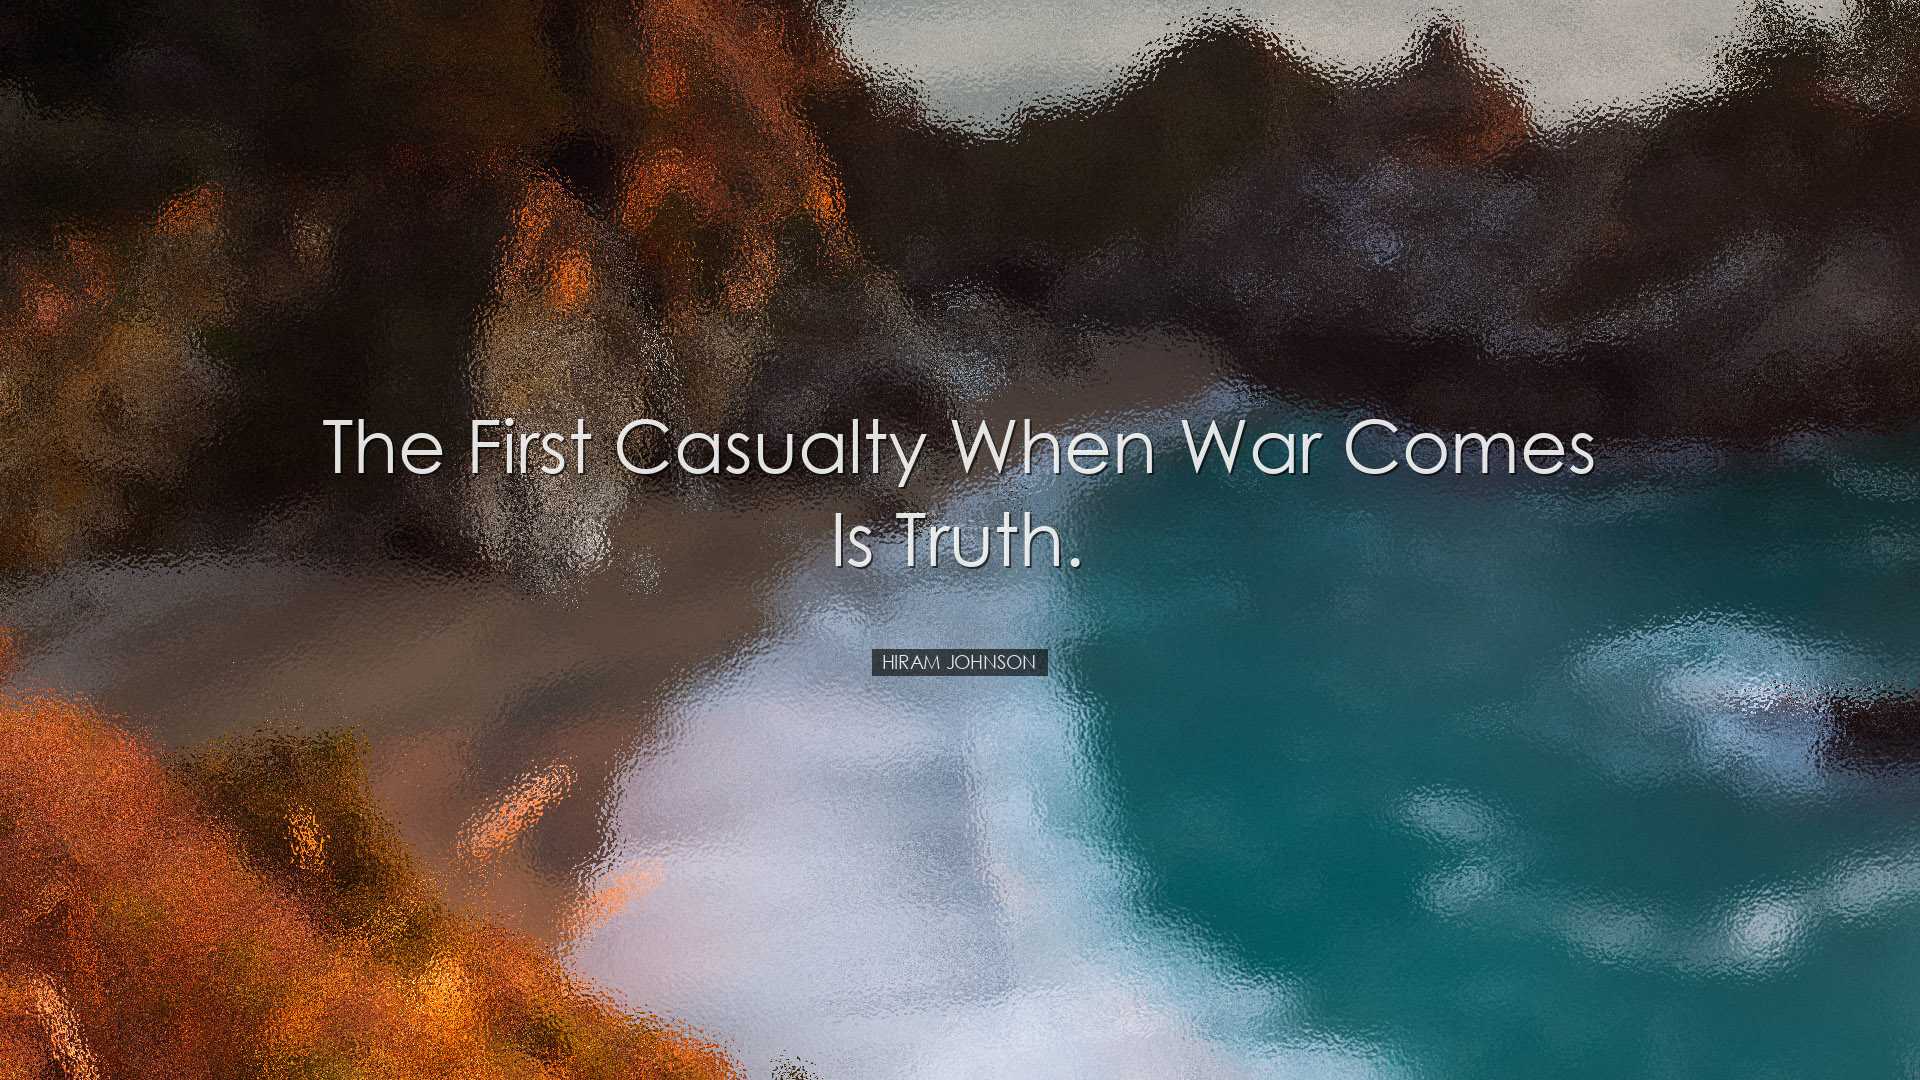 The first casualty when war comes is truth. - Hiram Johnson